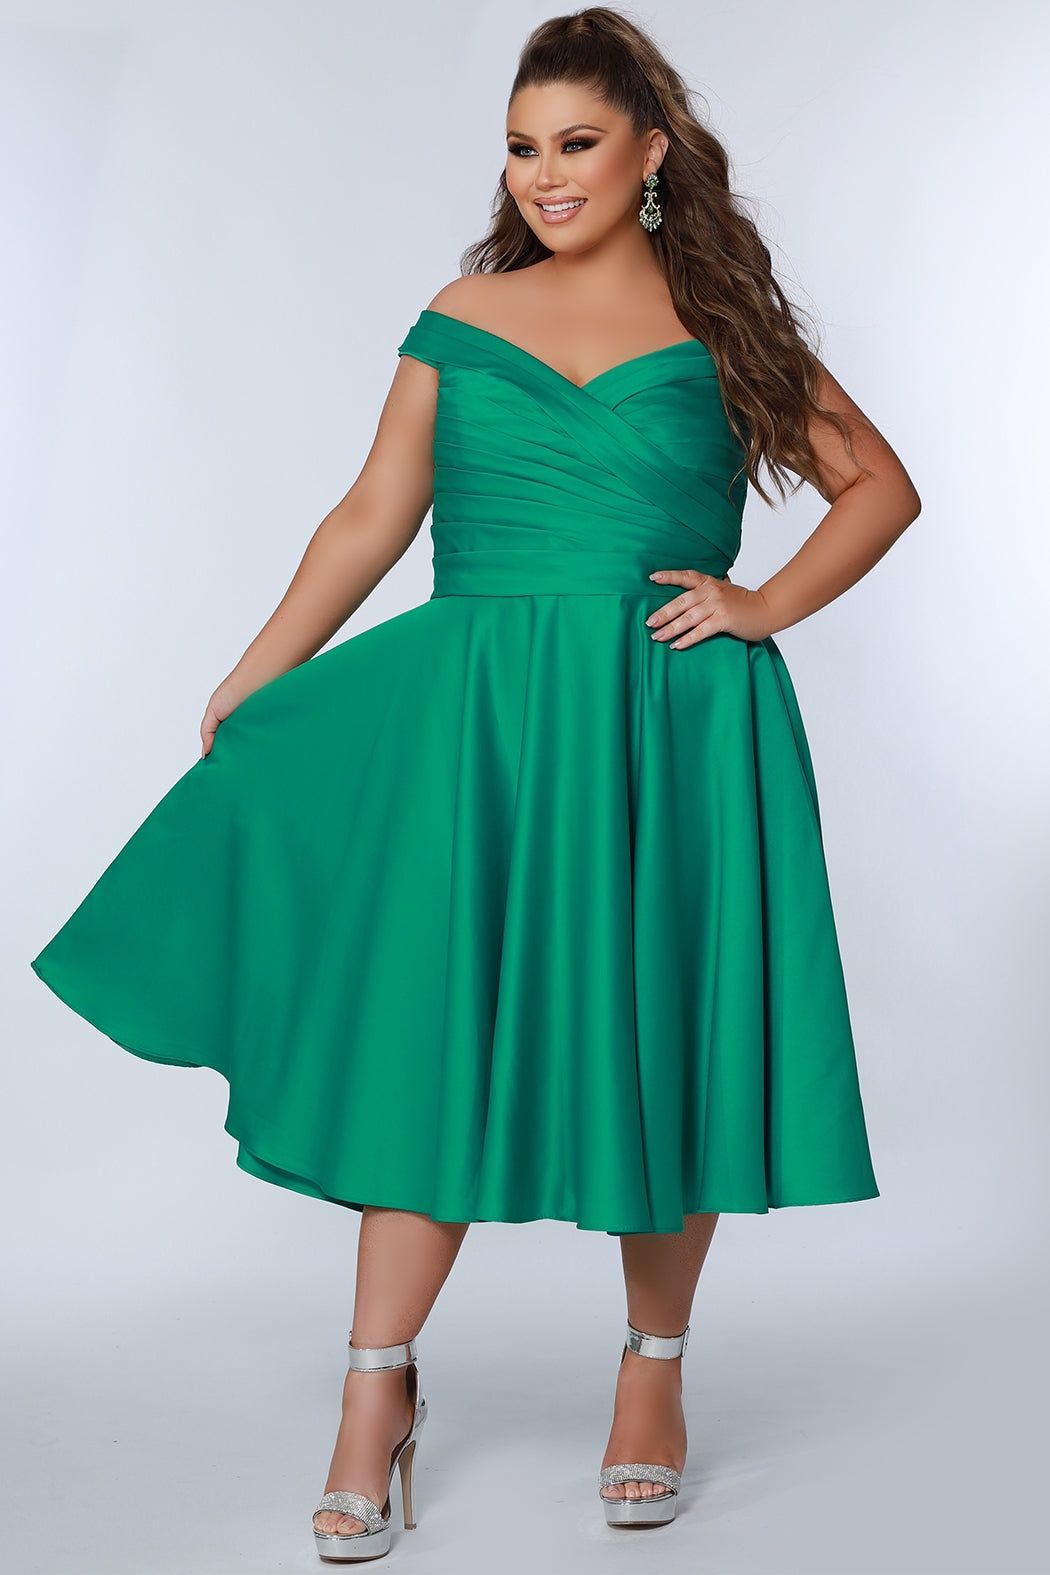 Style CE2301 Sydney's Closet Plus Size 24 Satin Emerald Green Cocktail Dress on Queenly